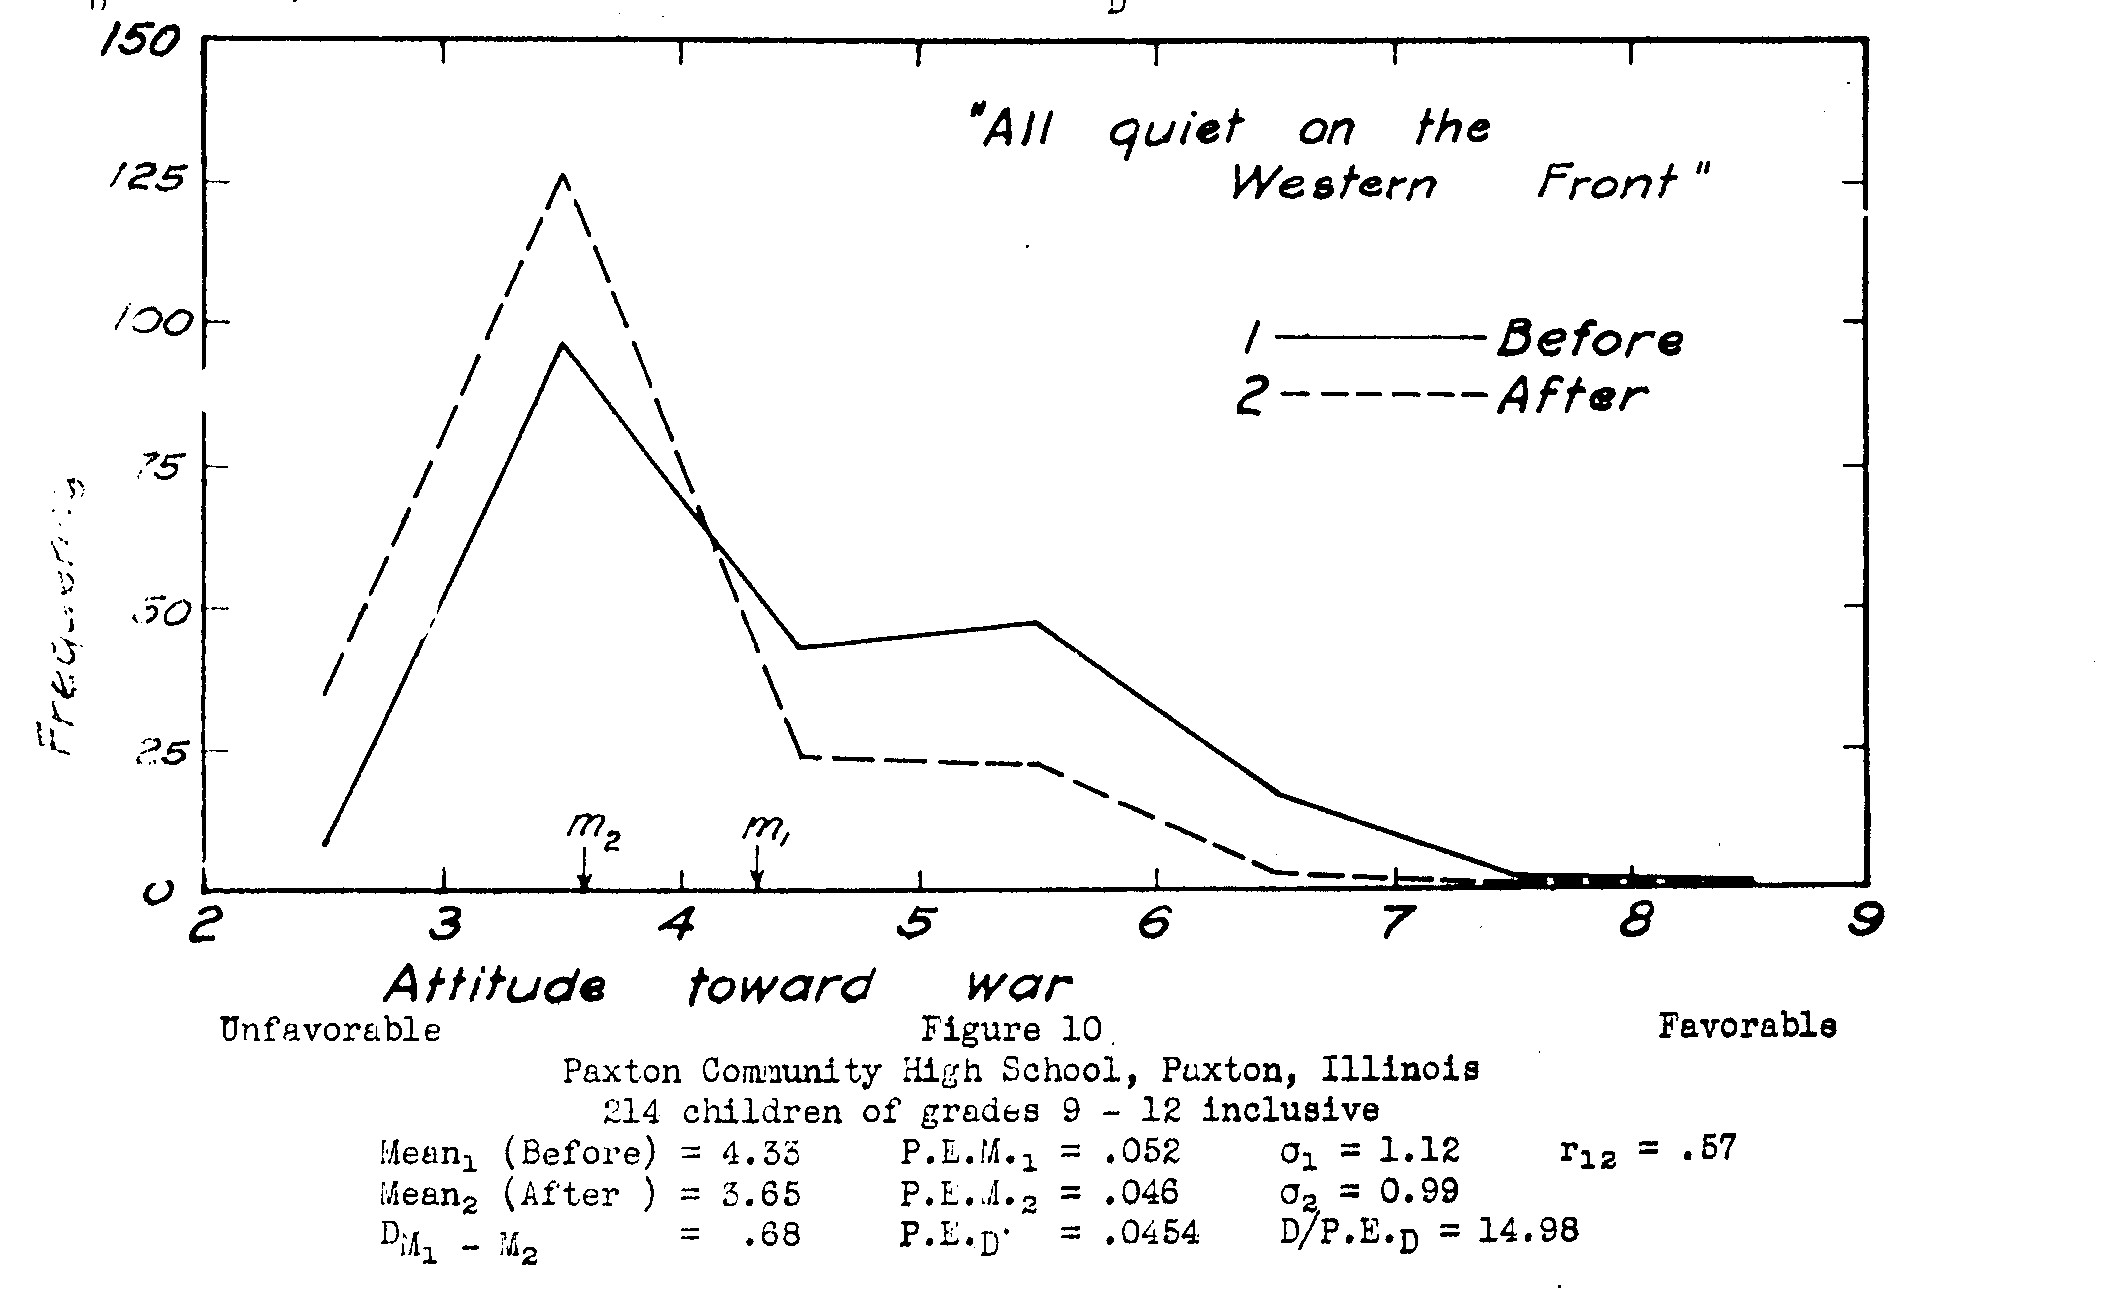 Figure 10, attitude toward war before and after ALL QUIET ON THE WESTERN FRONT